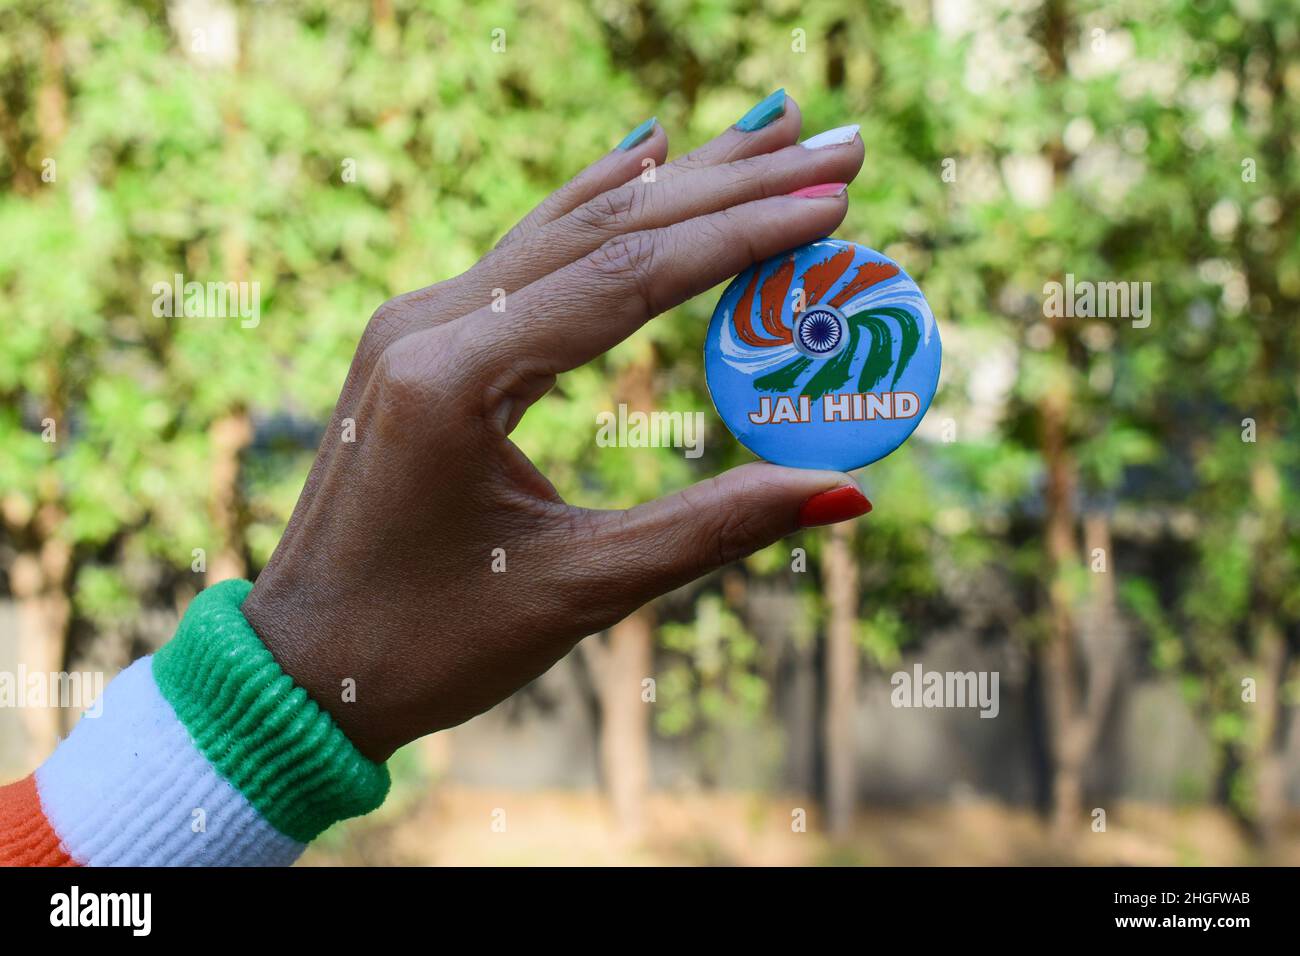 Female holding Indian badge written Jai hind meaning hail India. Person holding Indian independence day or Republic day wishes Stock Photo